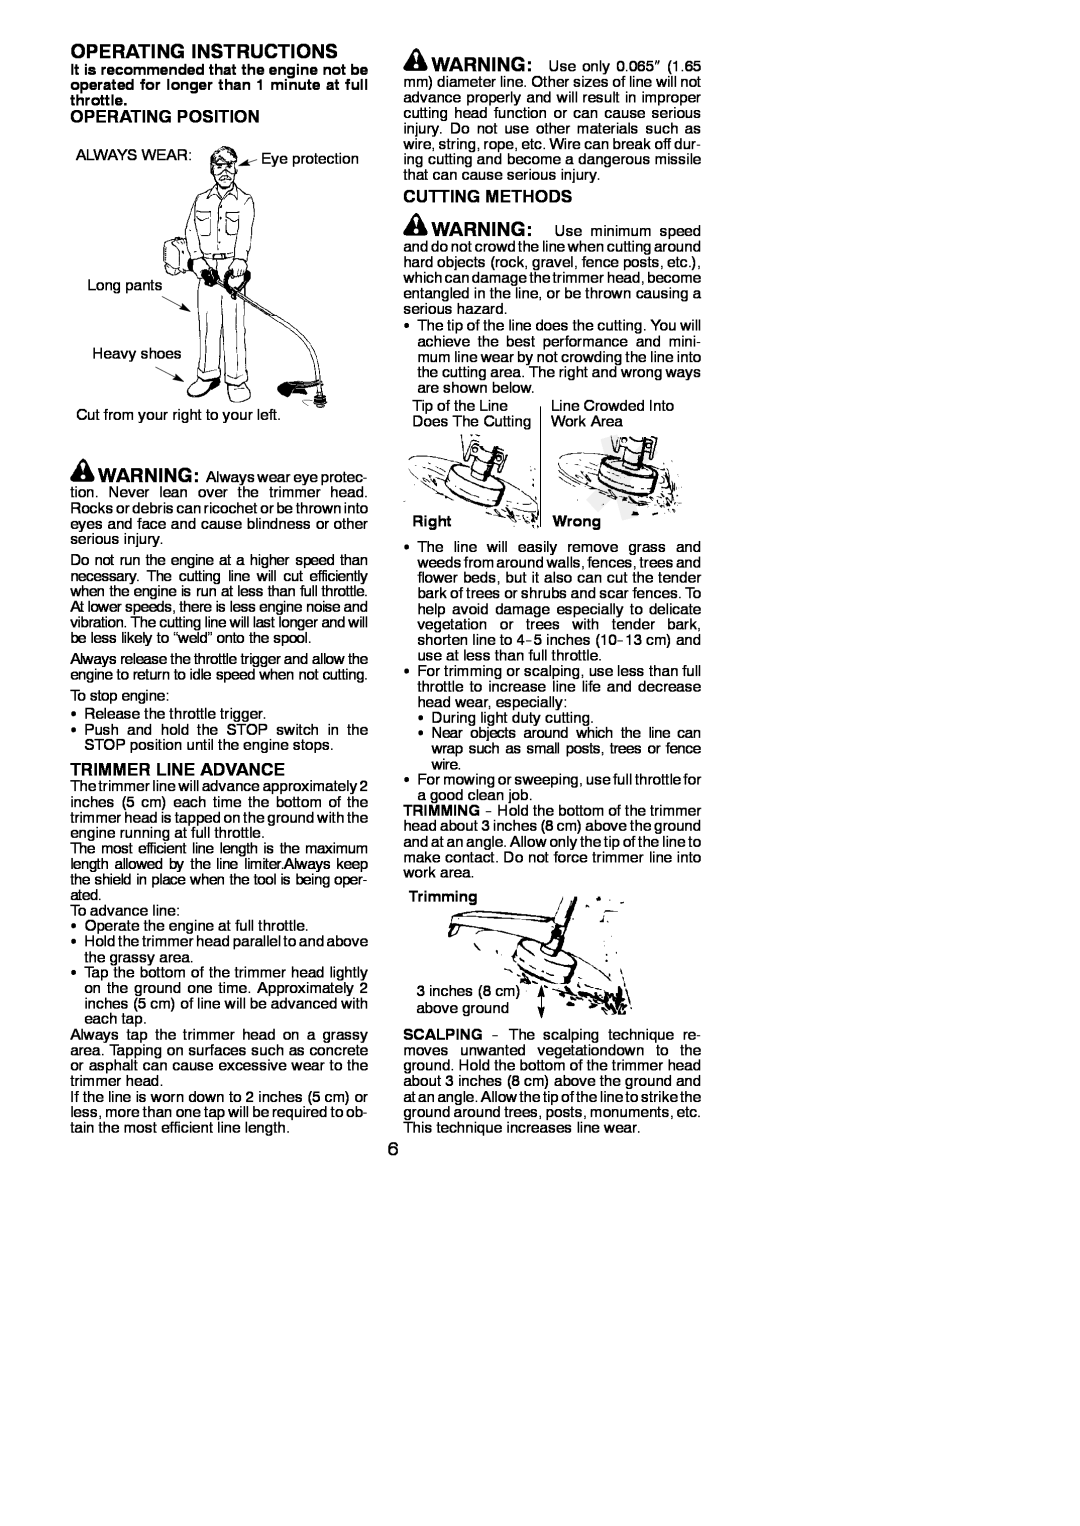 Sears FL20 Operating Instructions, Operating Position, Trimmer Line Advance, Cutting Methods, RightWrong, Trimming 